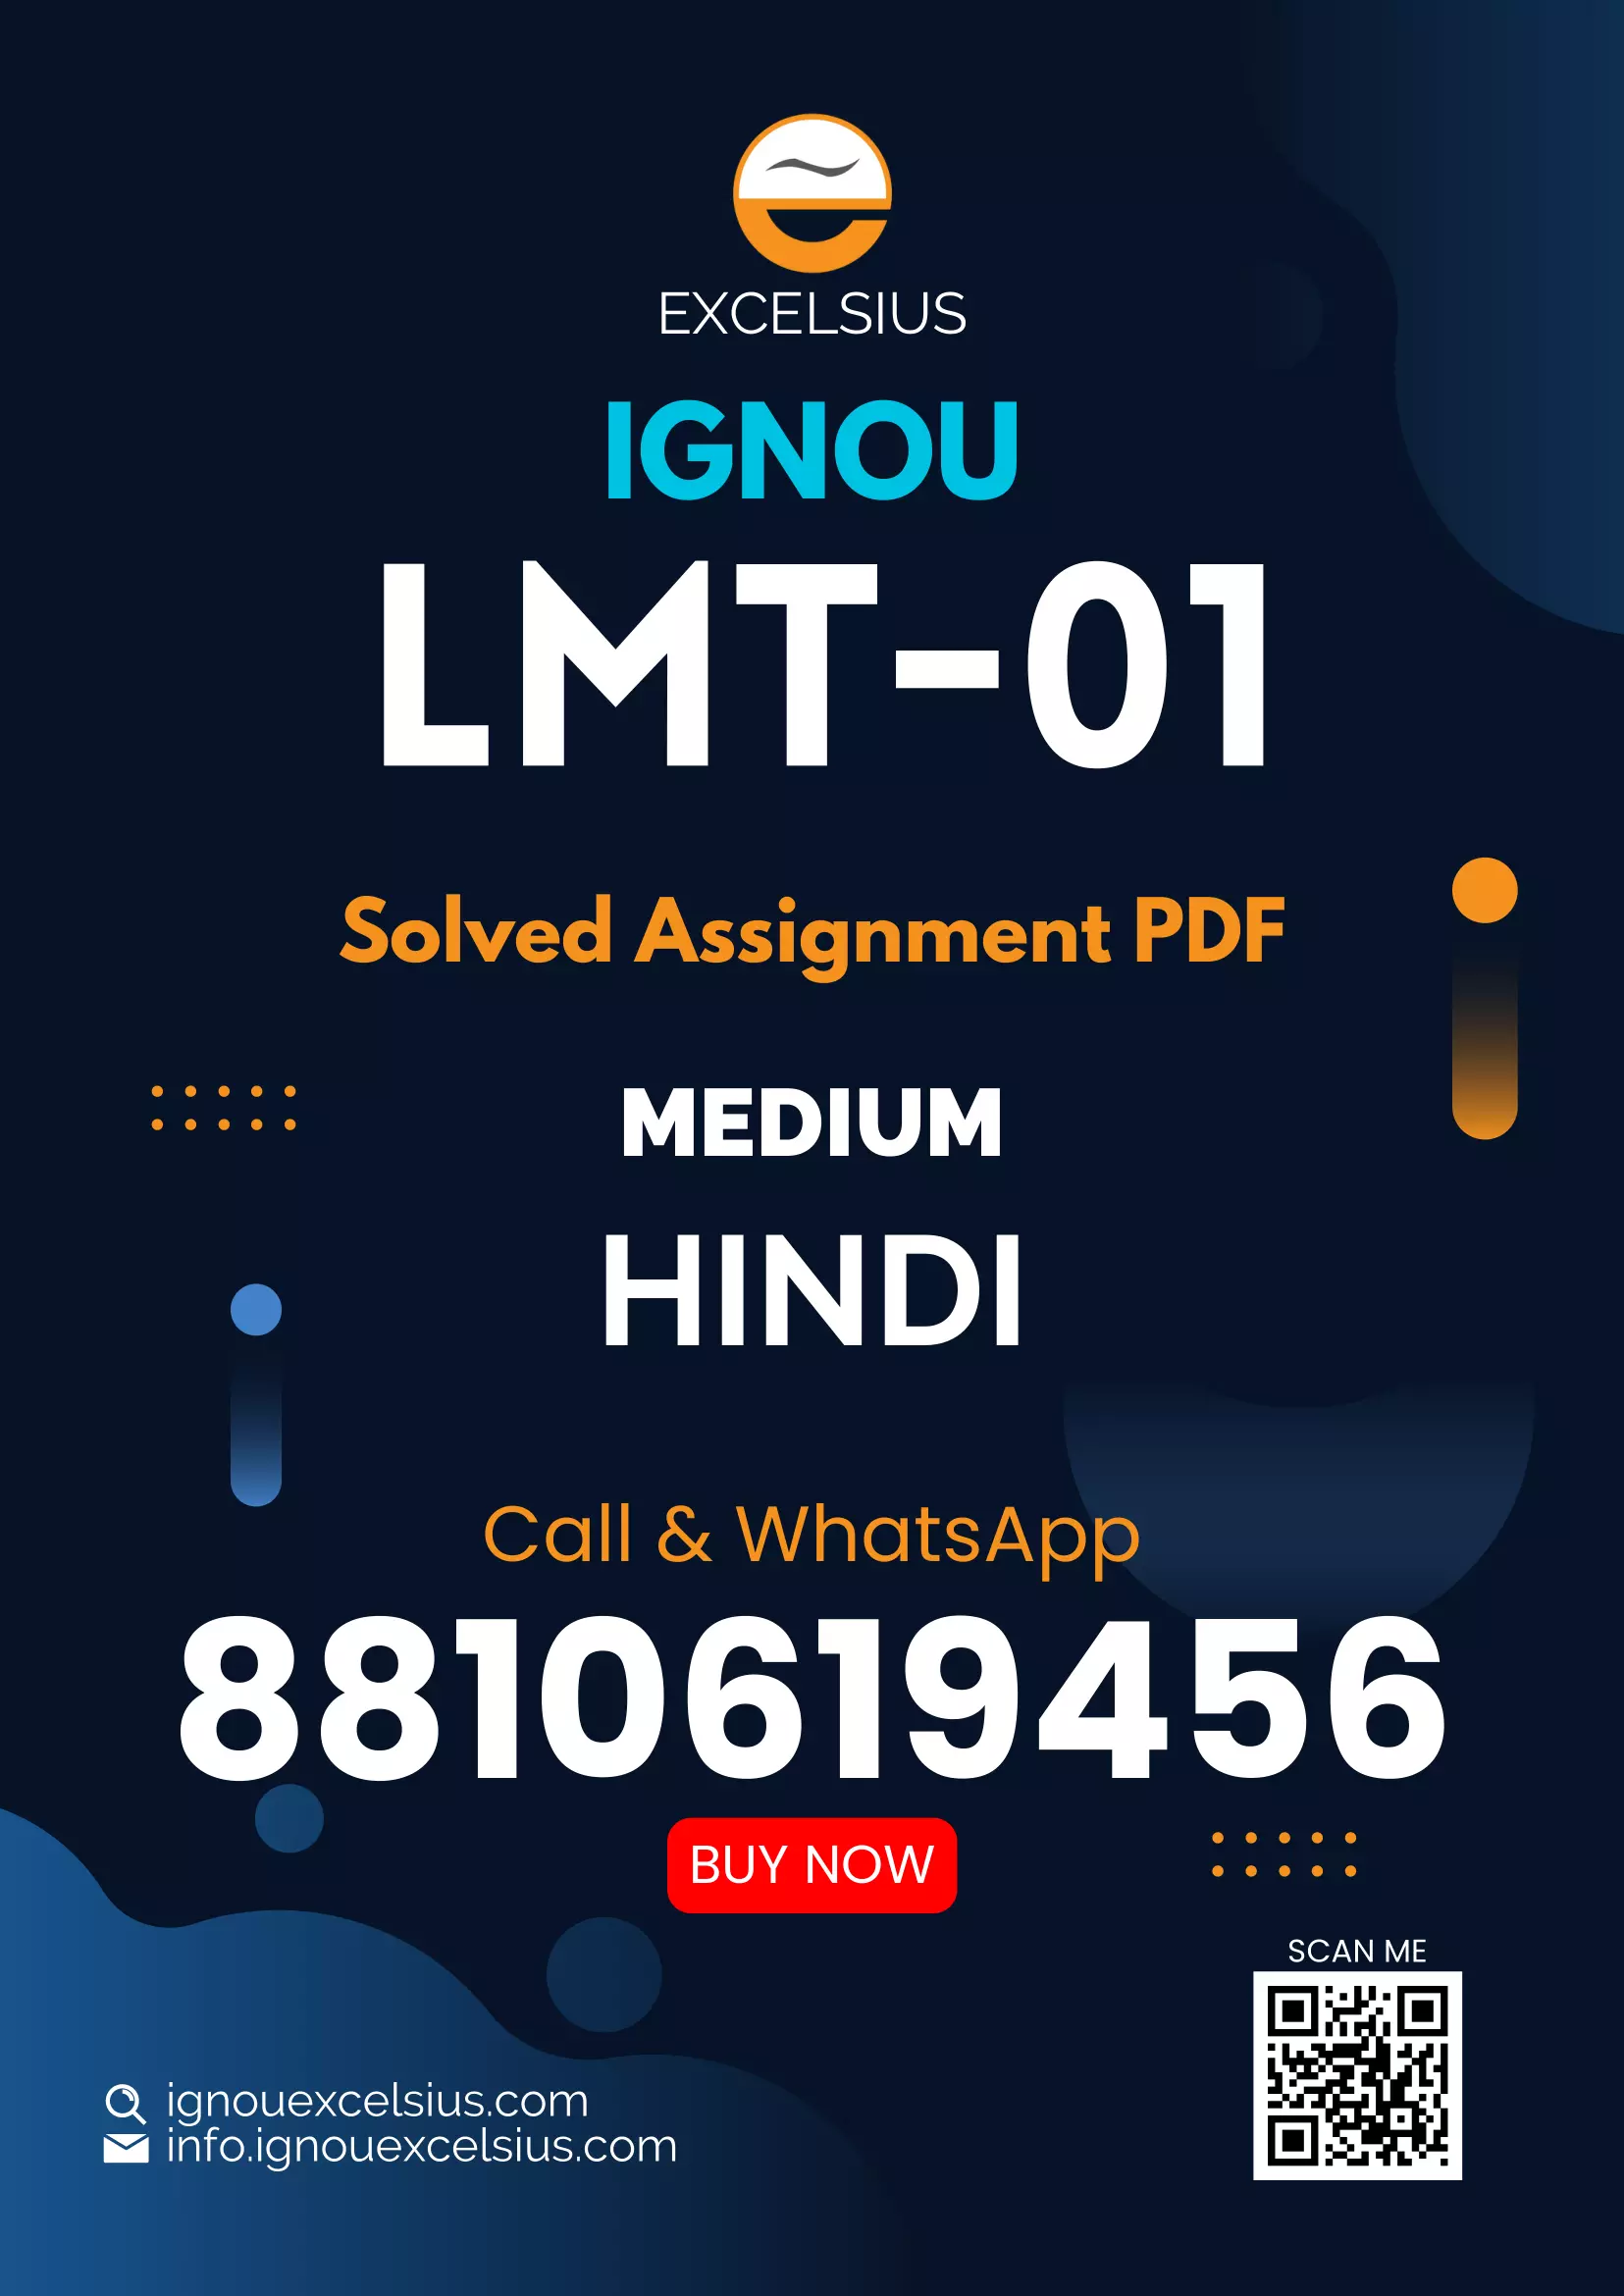 IGNOU LMT-01 - Learning Mathematics Latest Solved Assignment -July 2022 – January 2023